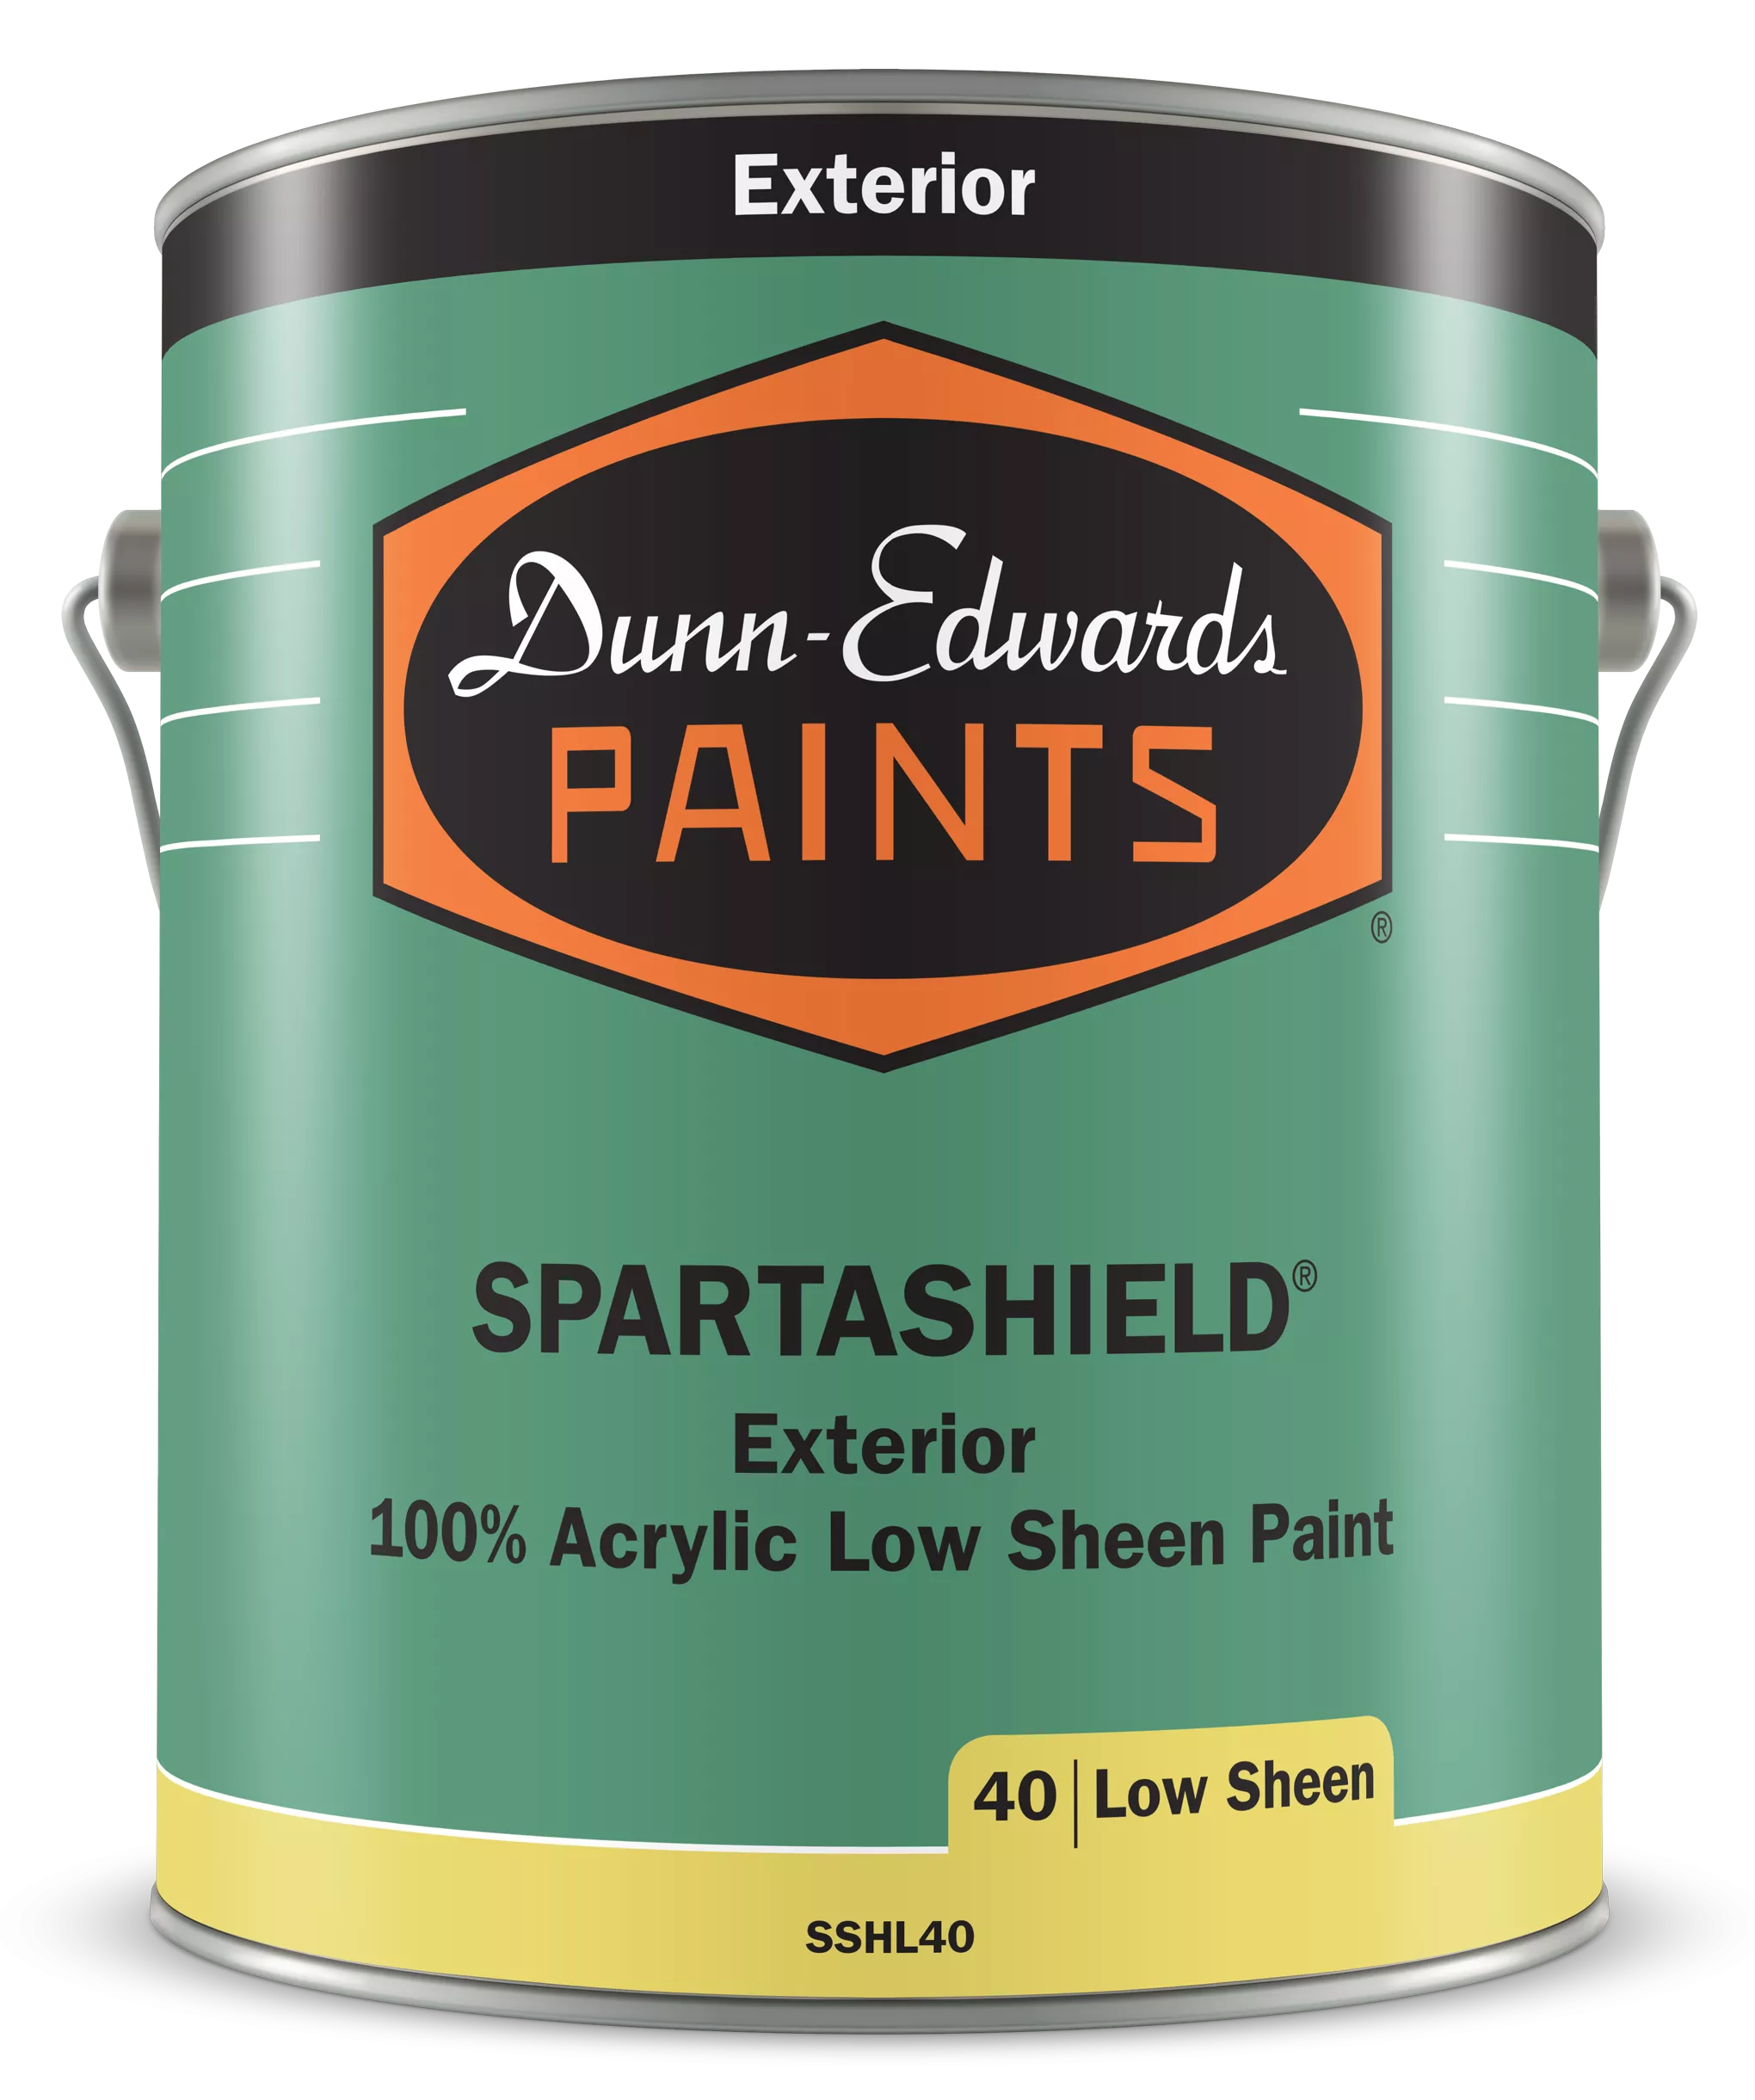 SPARTASHIELD Exterior 100% Acrylic Low Sheen Paint Can